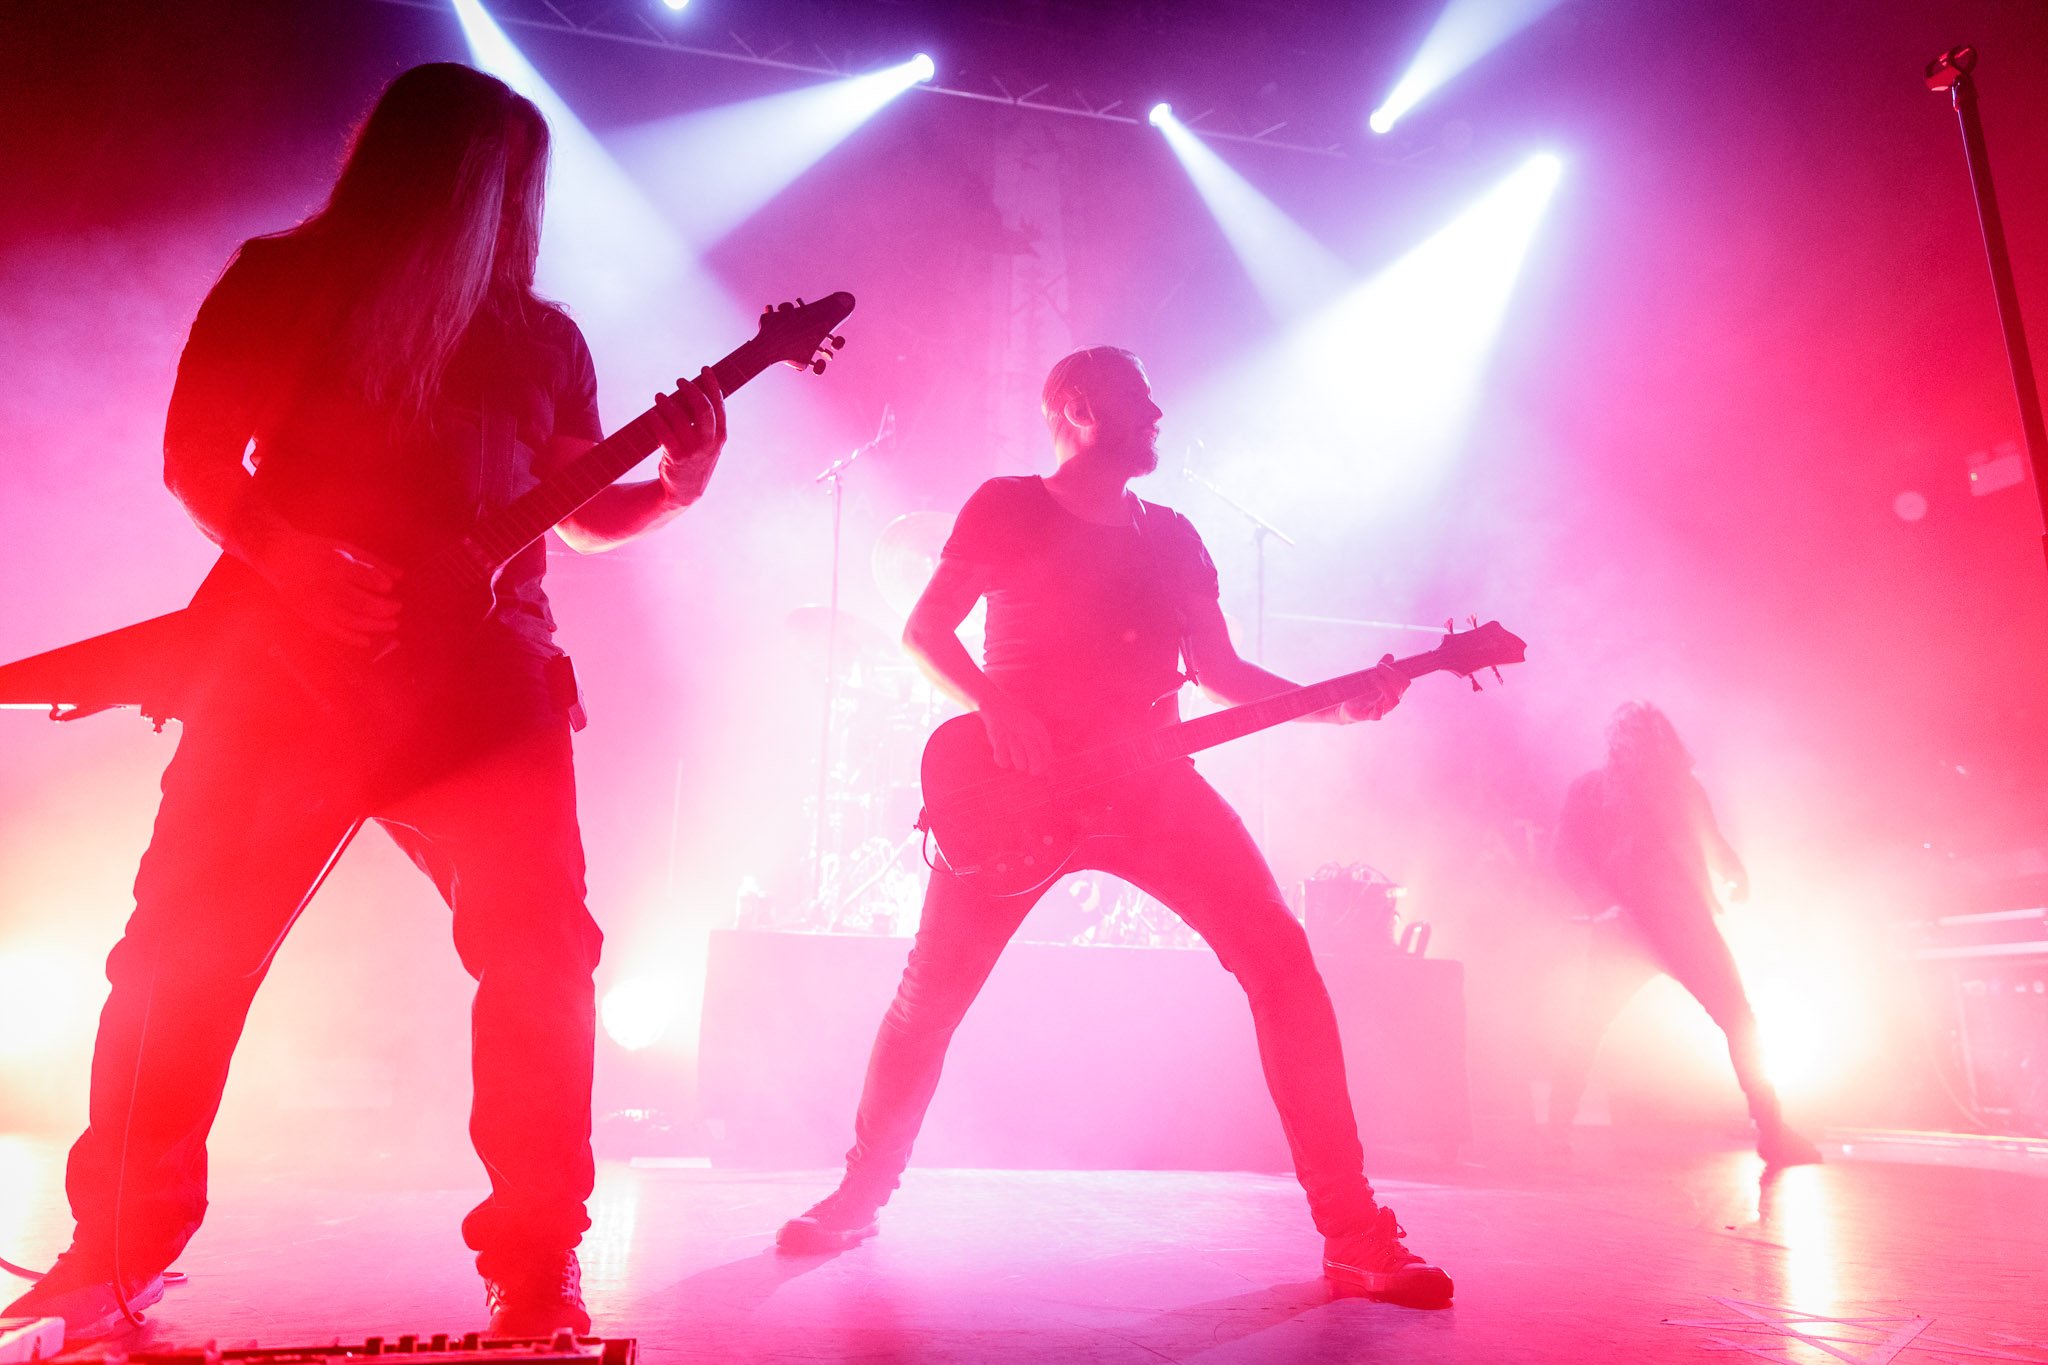 Katatonia at the O2 Ritz in Manchester on February 11th 2023 ©J